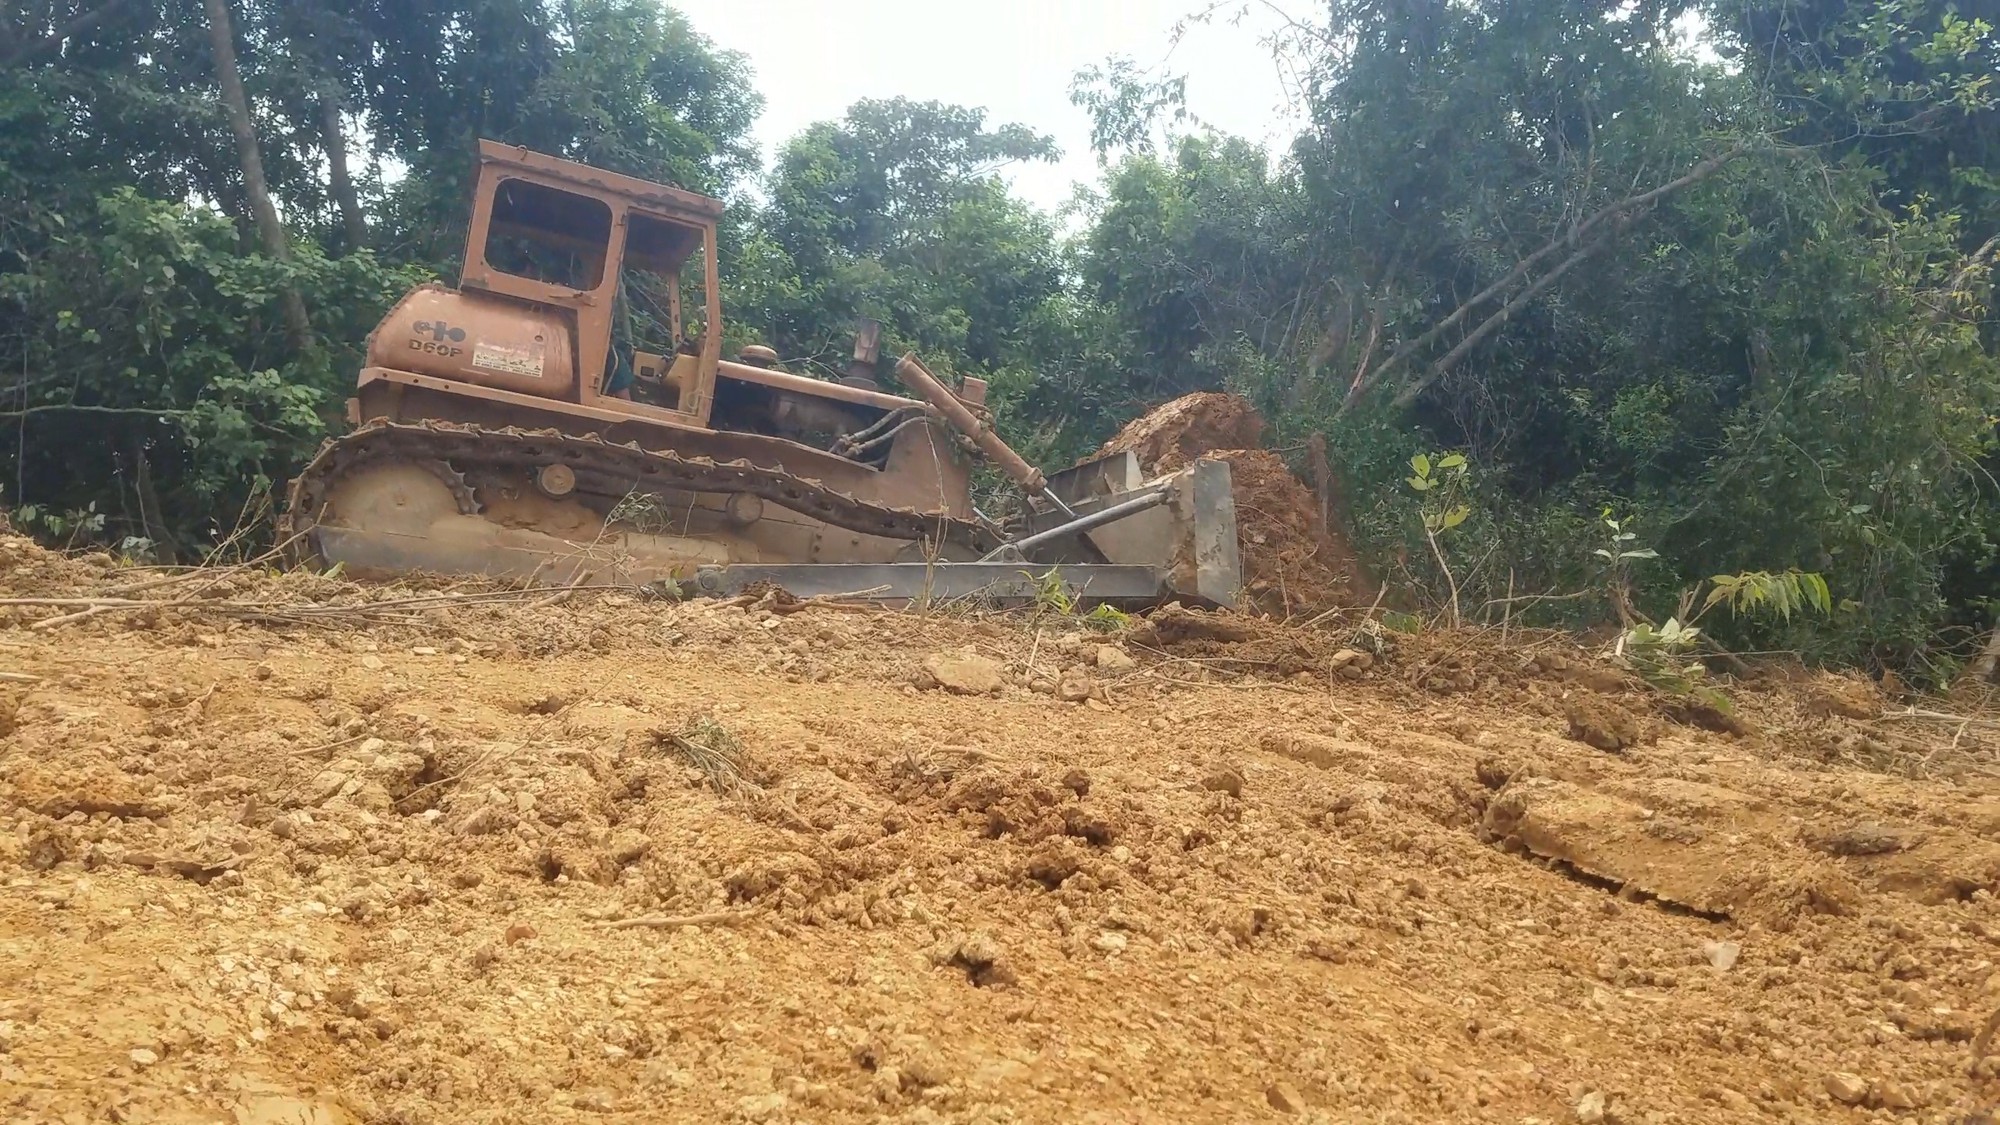 An excavator is used to fell trees within the natural forest. Photo: Tuoi Tre